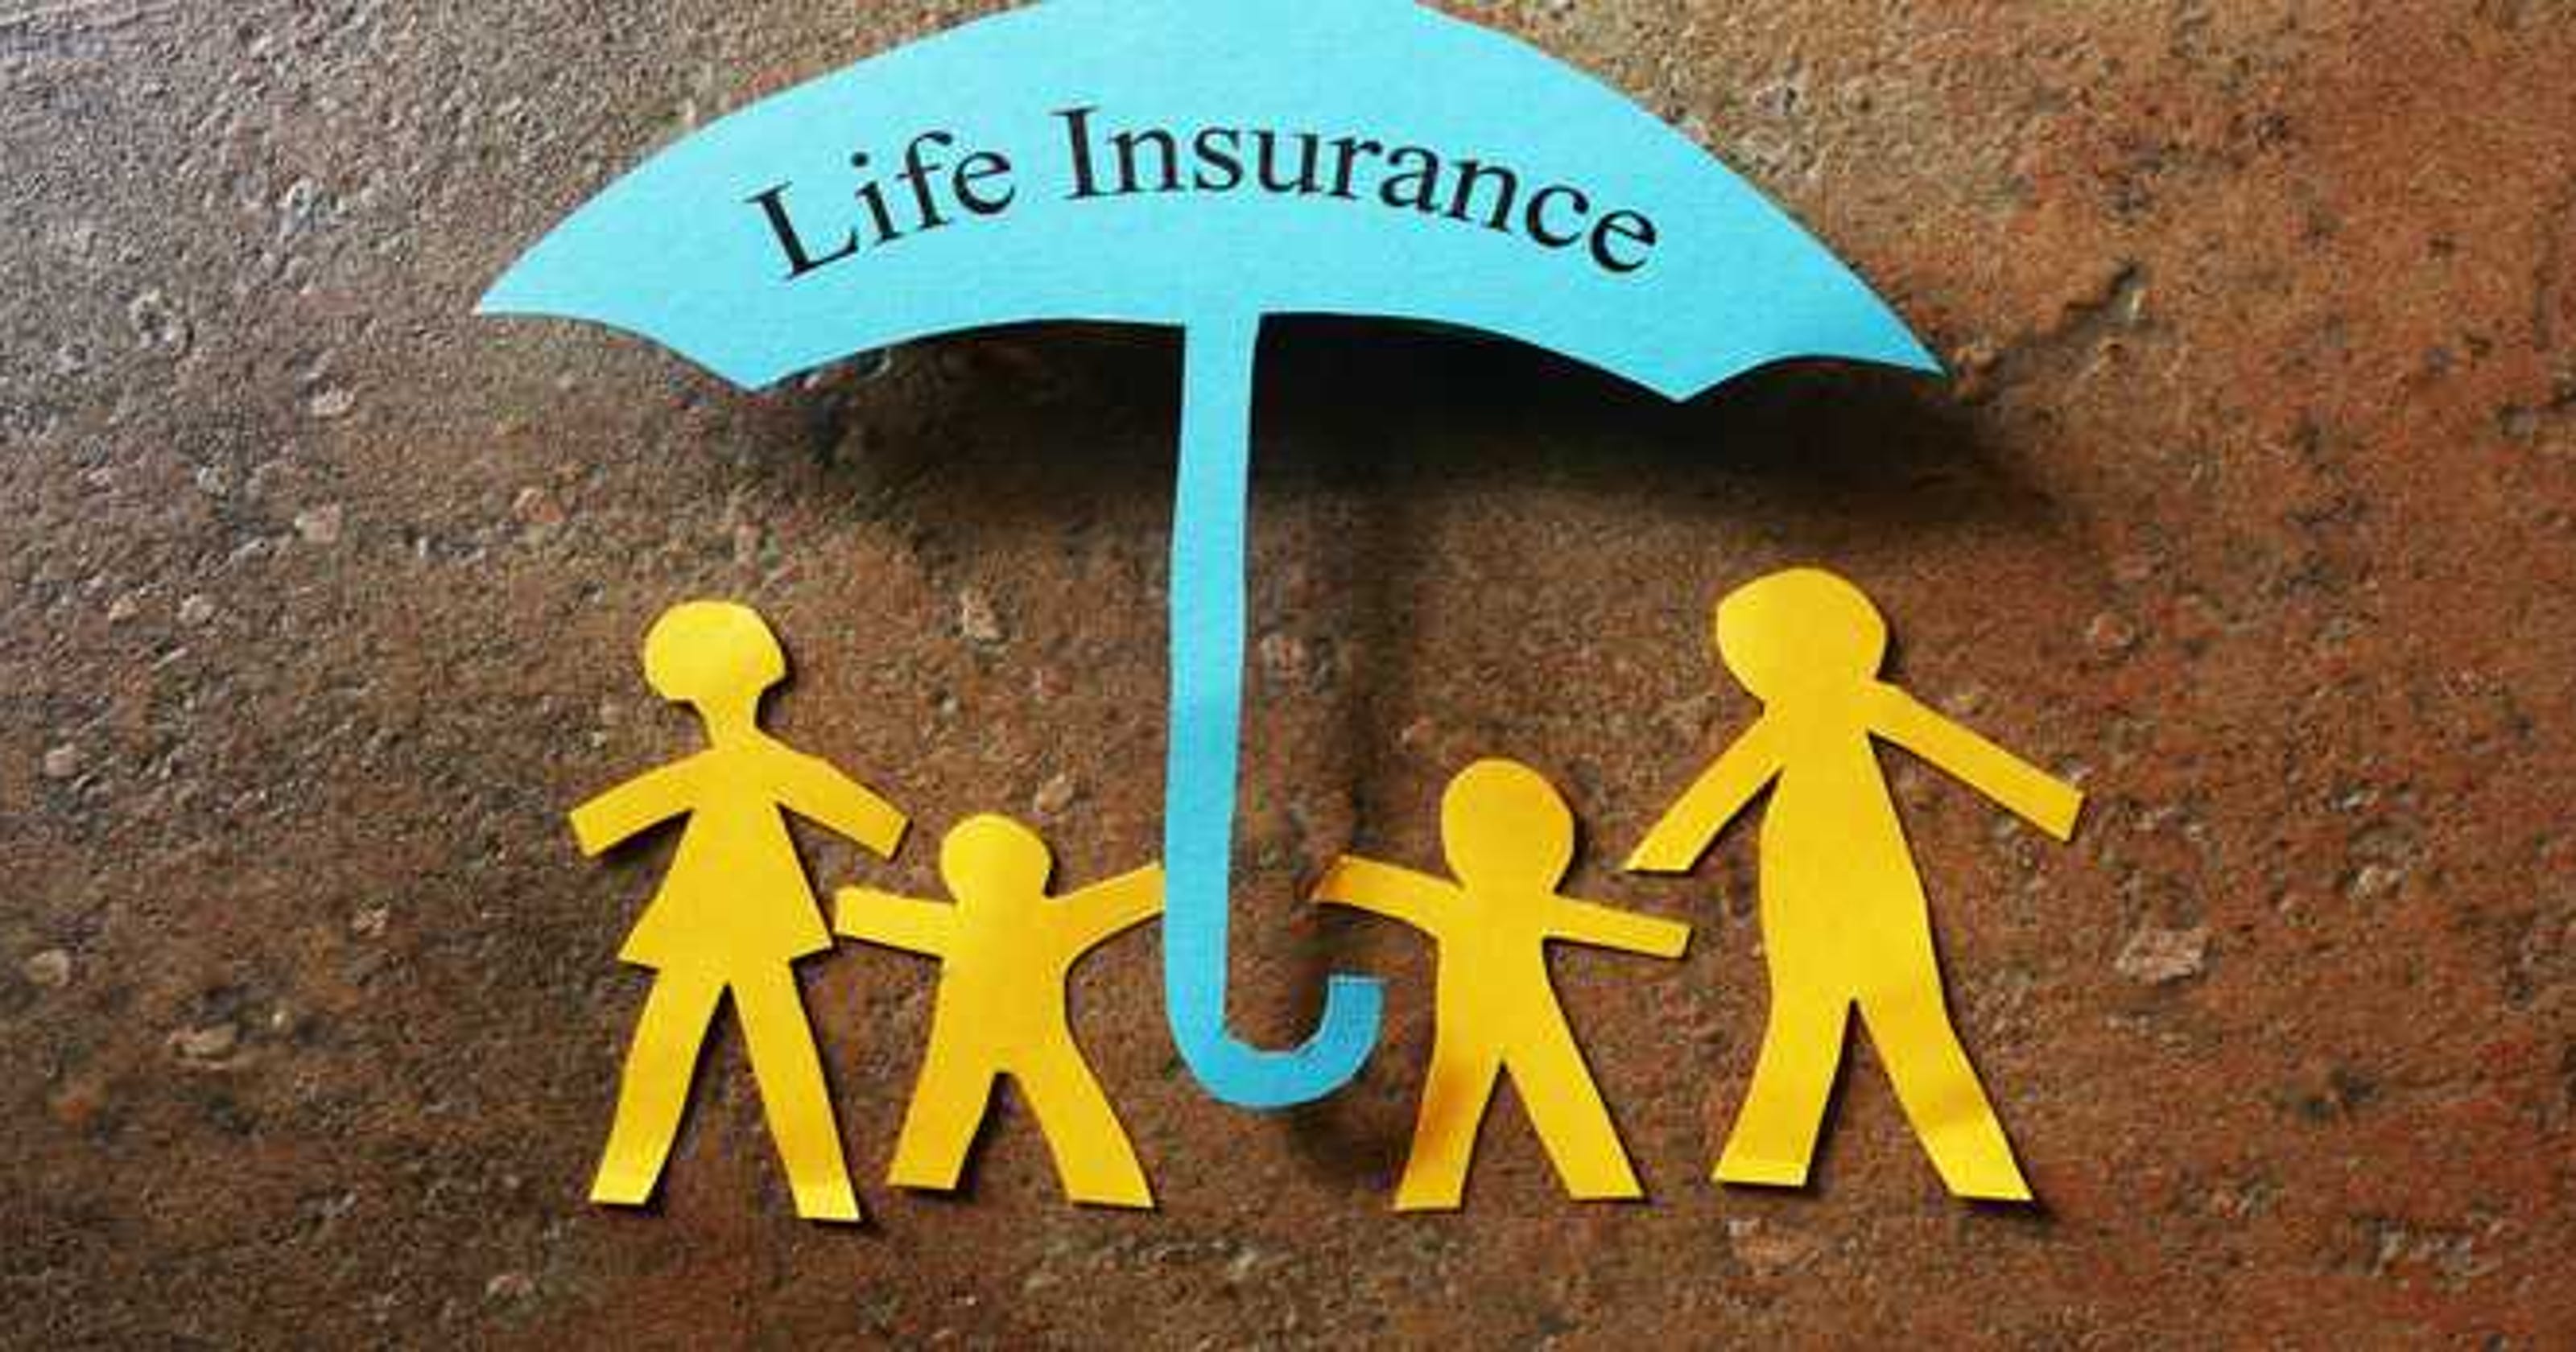 Term life insurance: Is paying for it worth it?